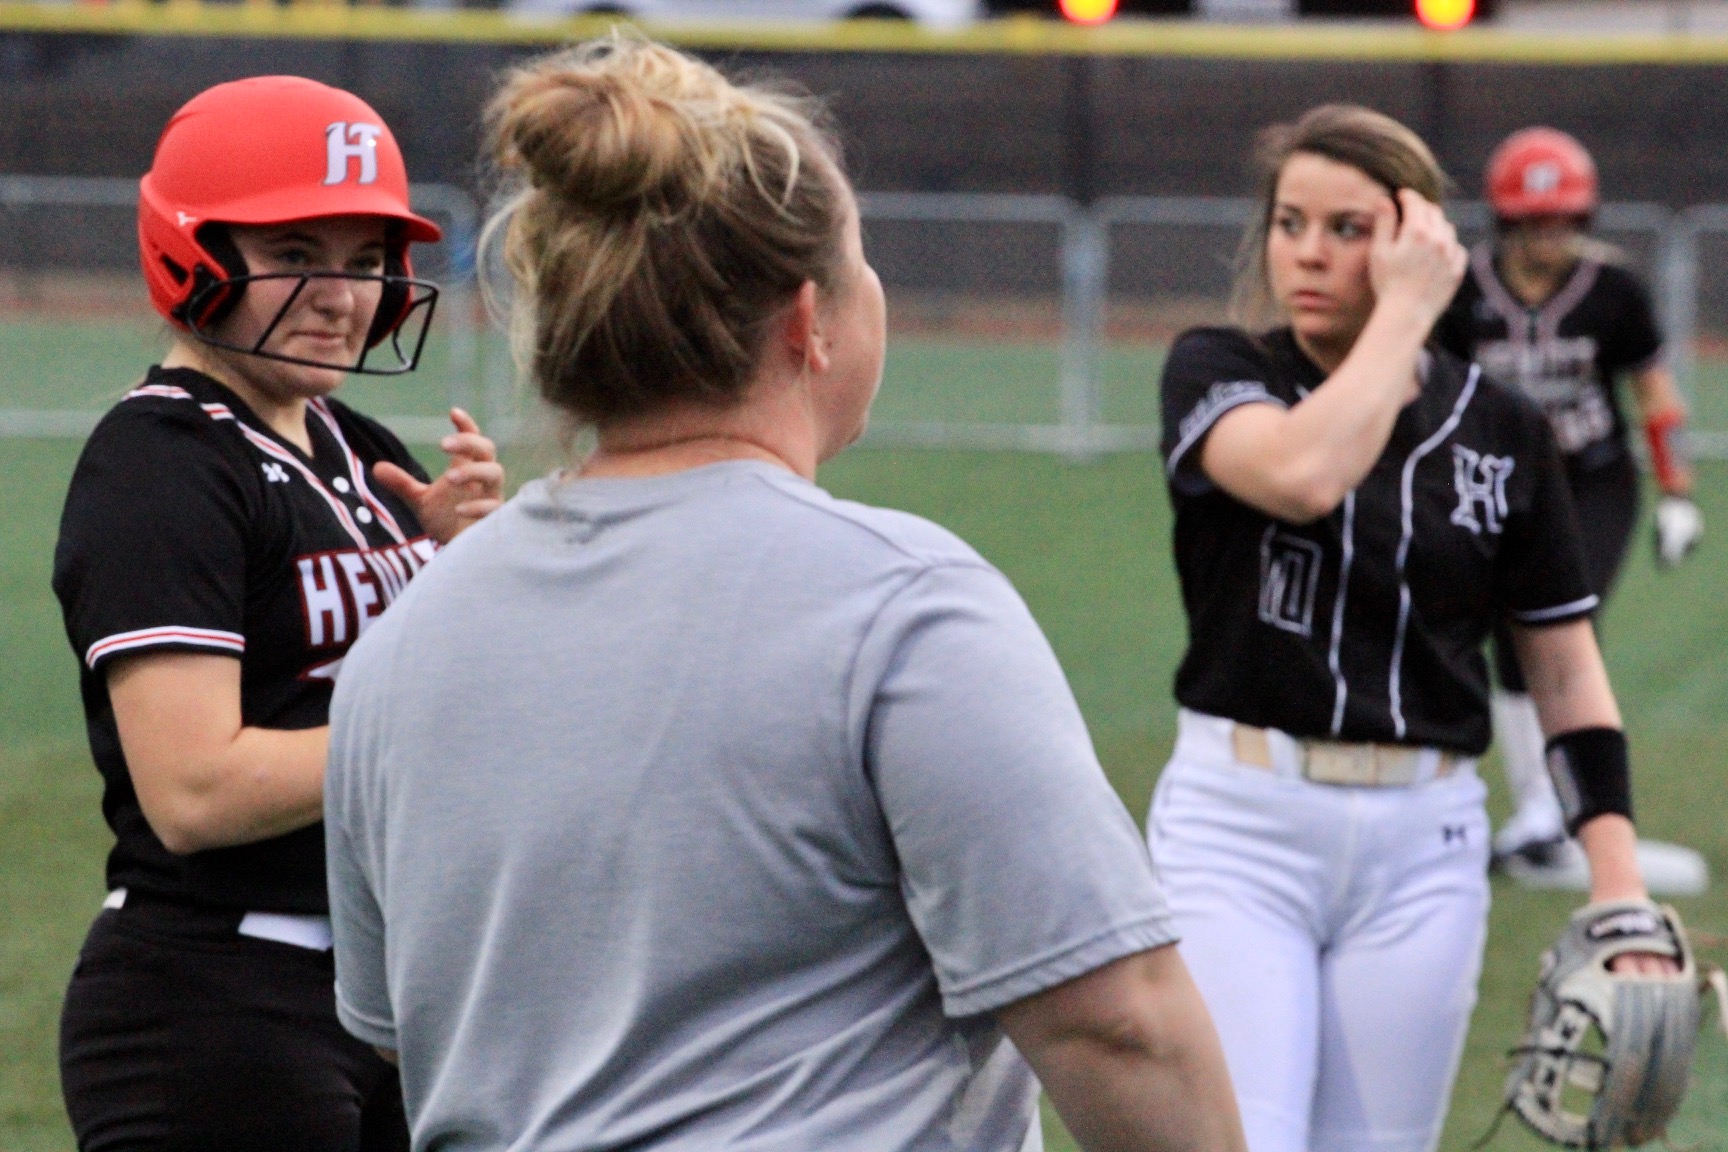 Hewitt-Trussville ranks 1st in state softball poll; No. 9 Springville also listed